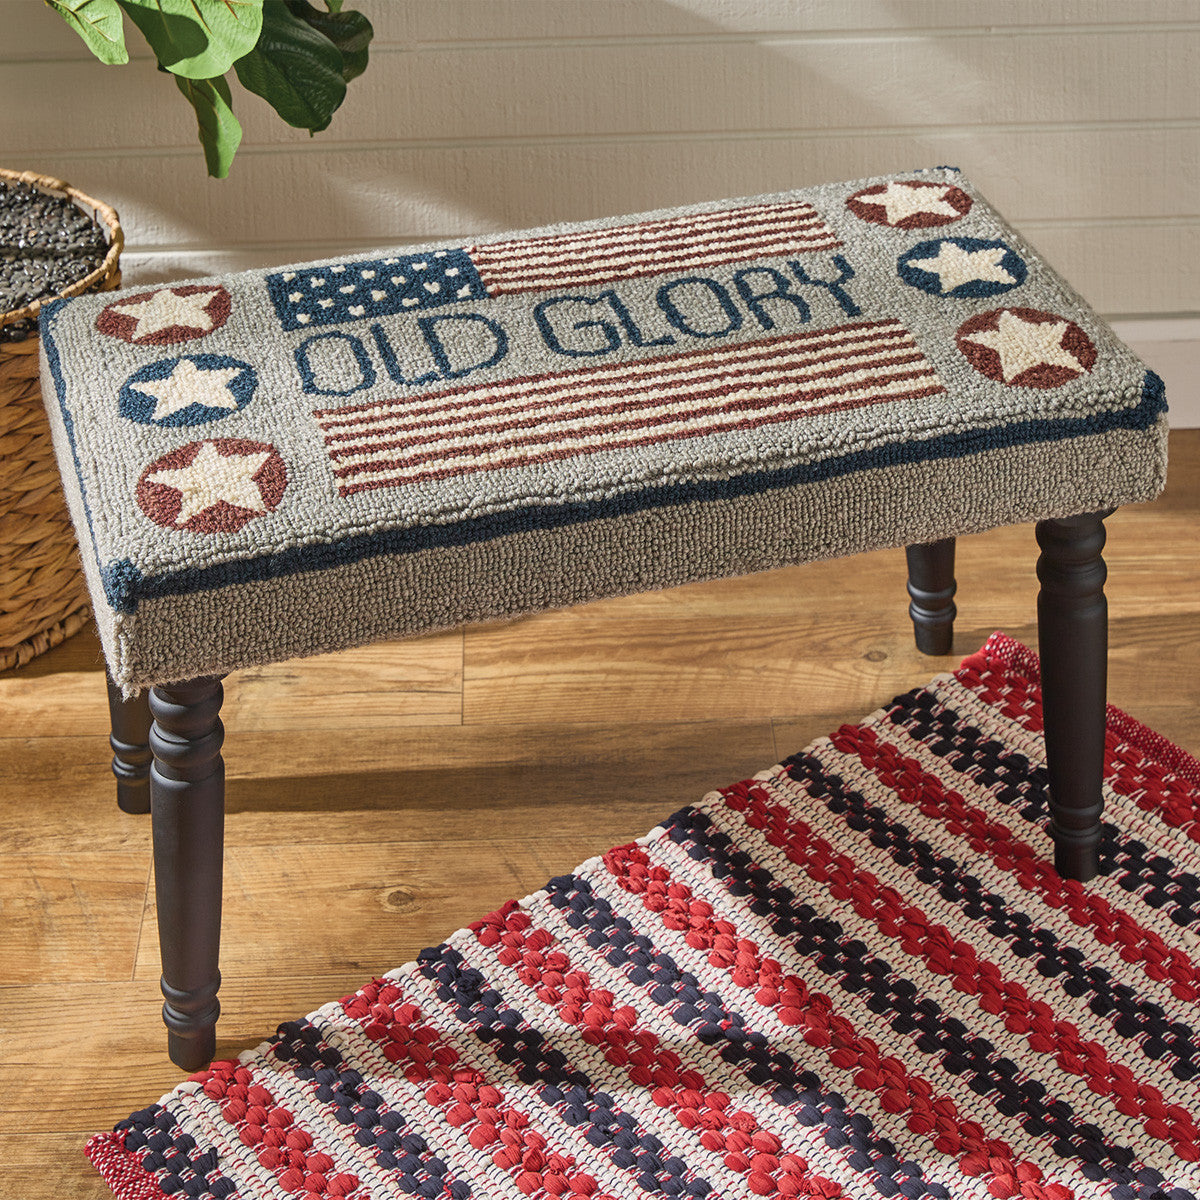 Old Glory Hooked Bench Park Designs